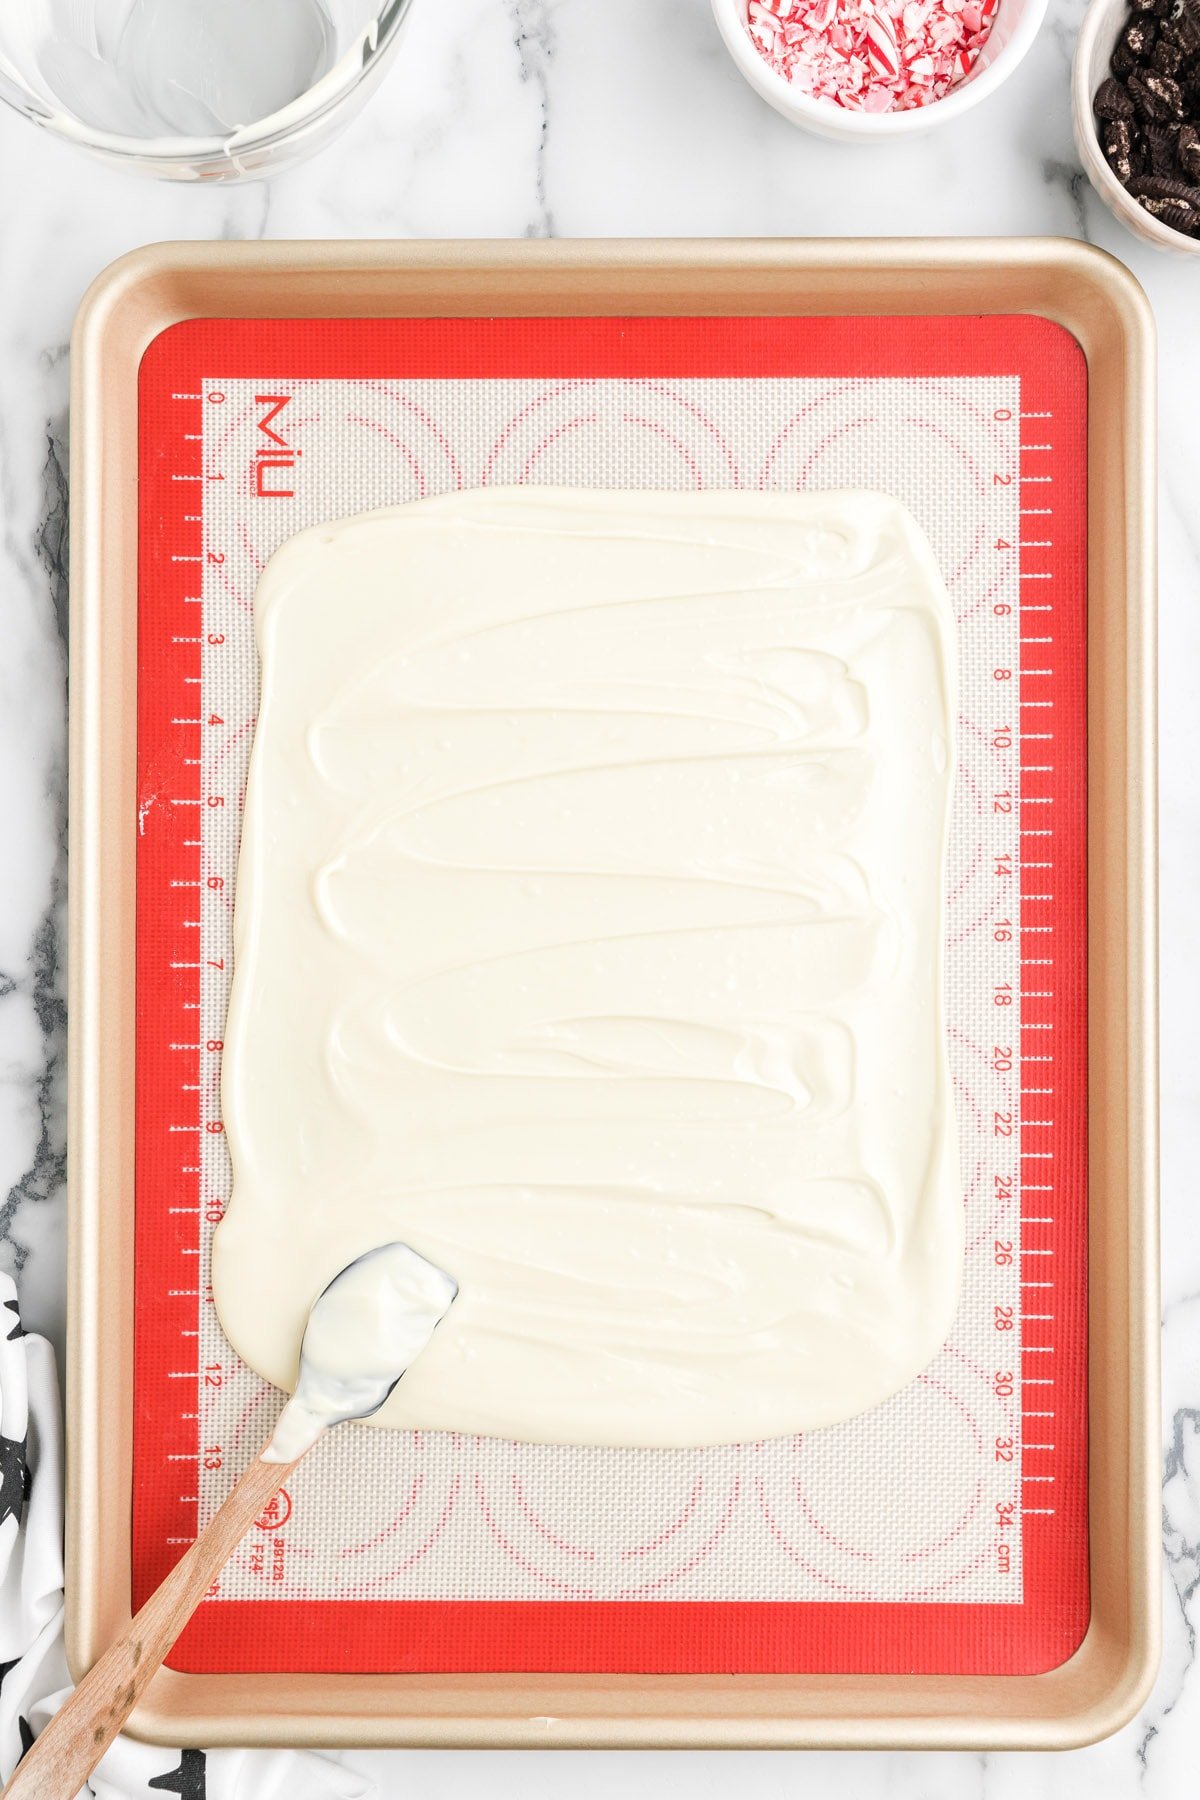 Pour the melted white chocolate onto the prepared sheet